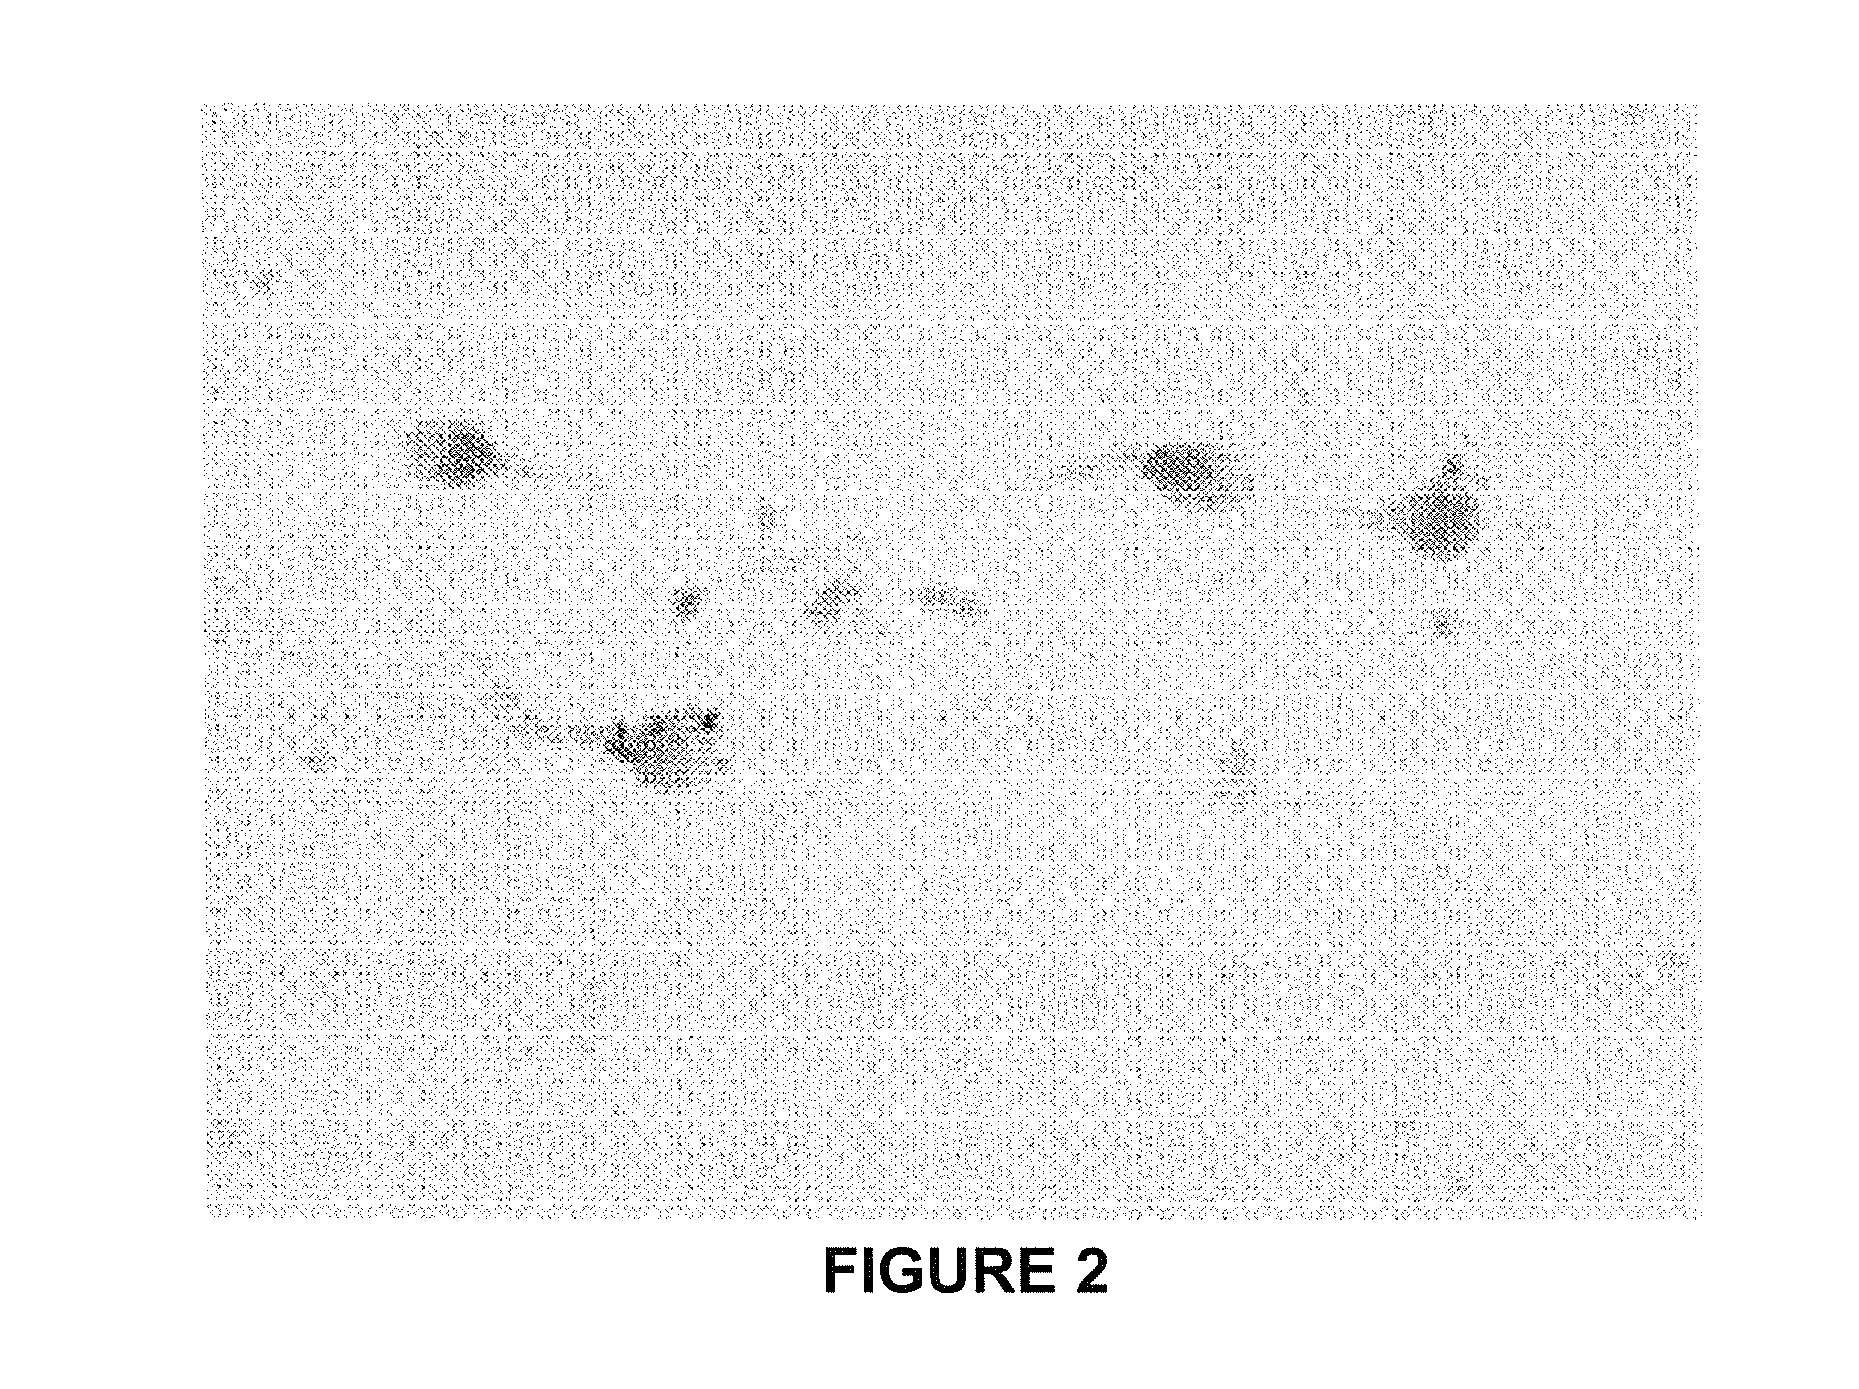 Method For Determining The Production Of Reactive Oxygen Species In A Cellular Population